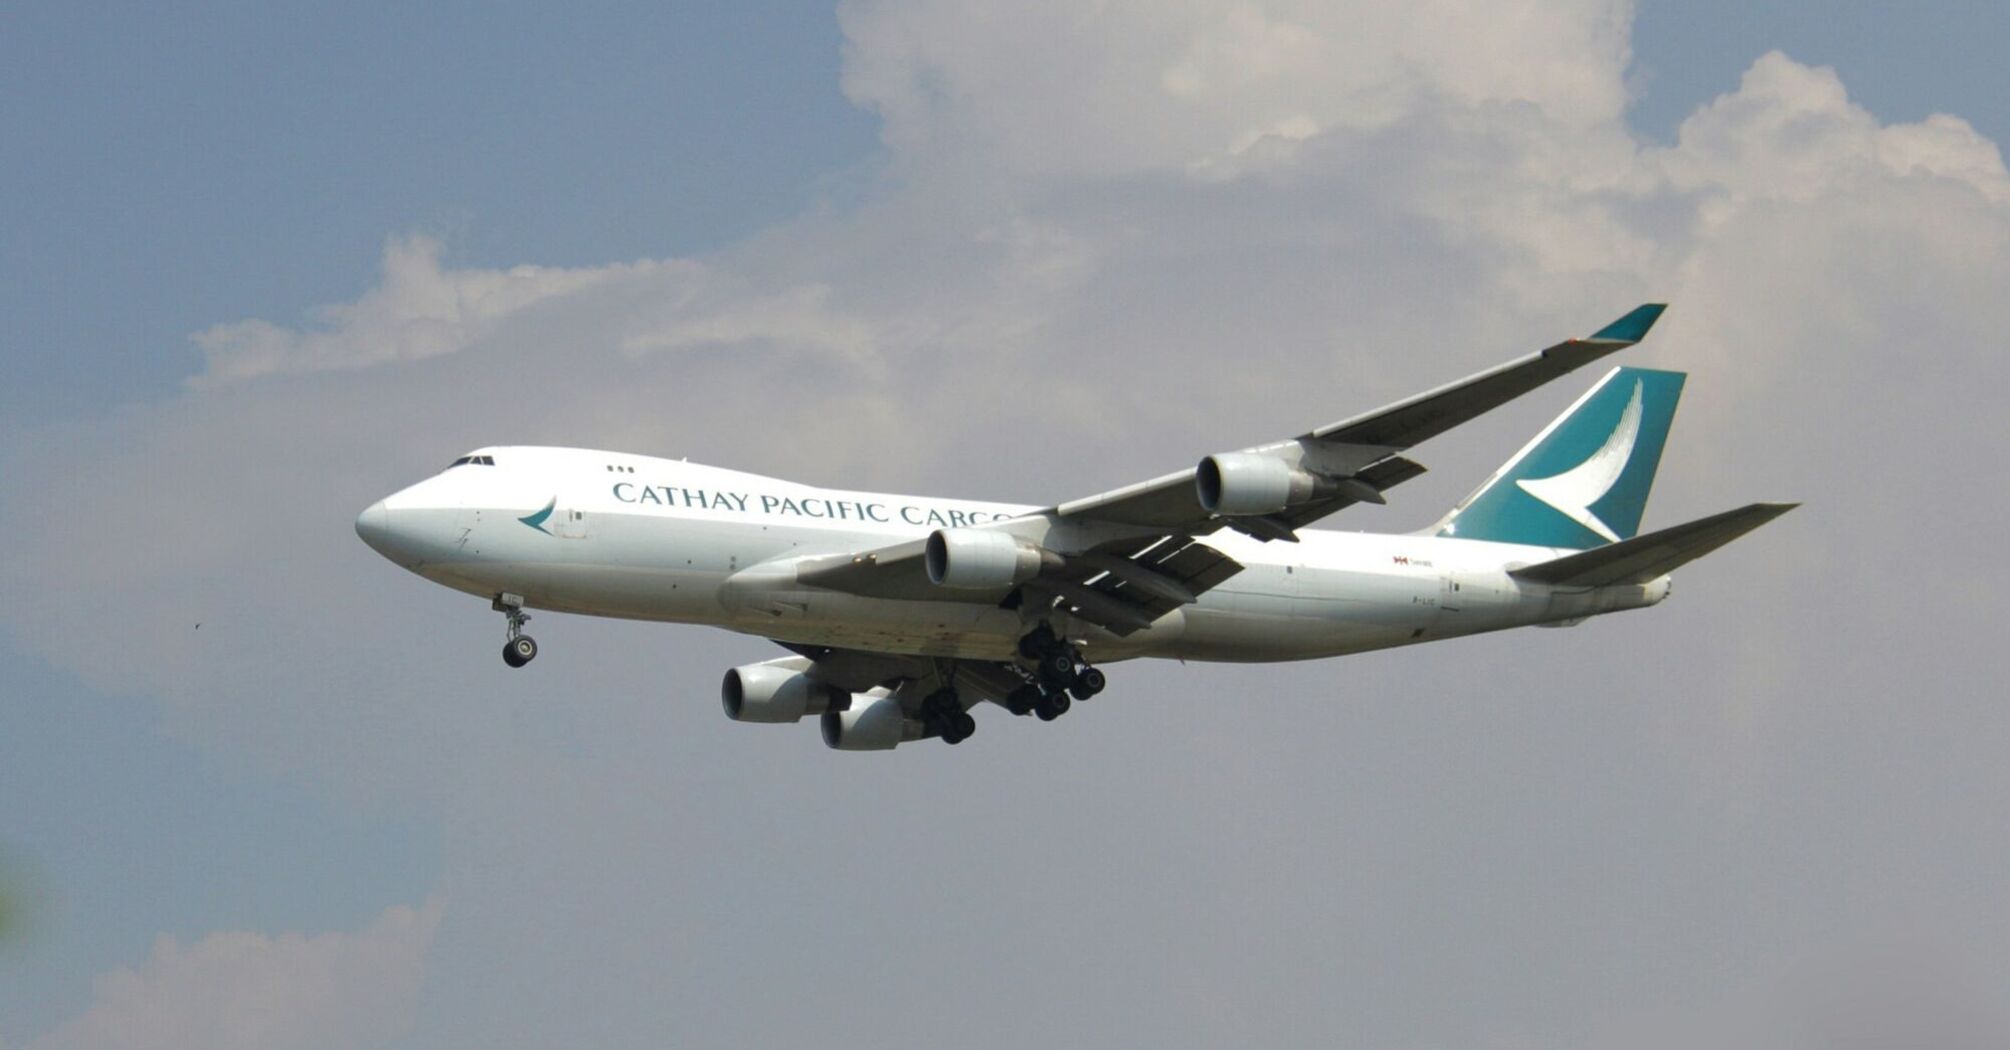 Cathay Pacific airplane approaching airport